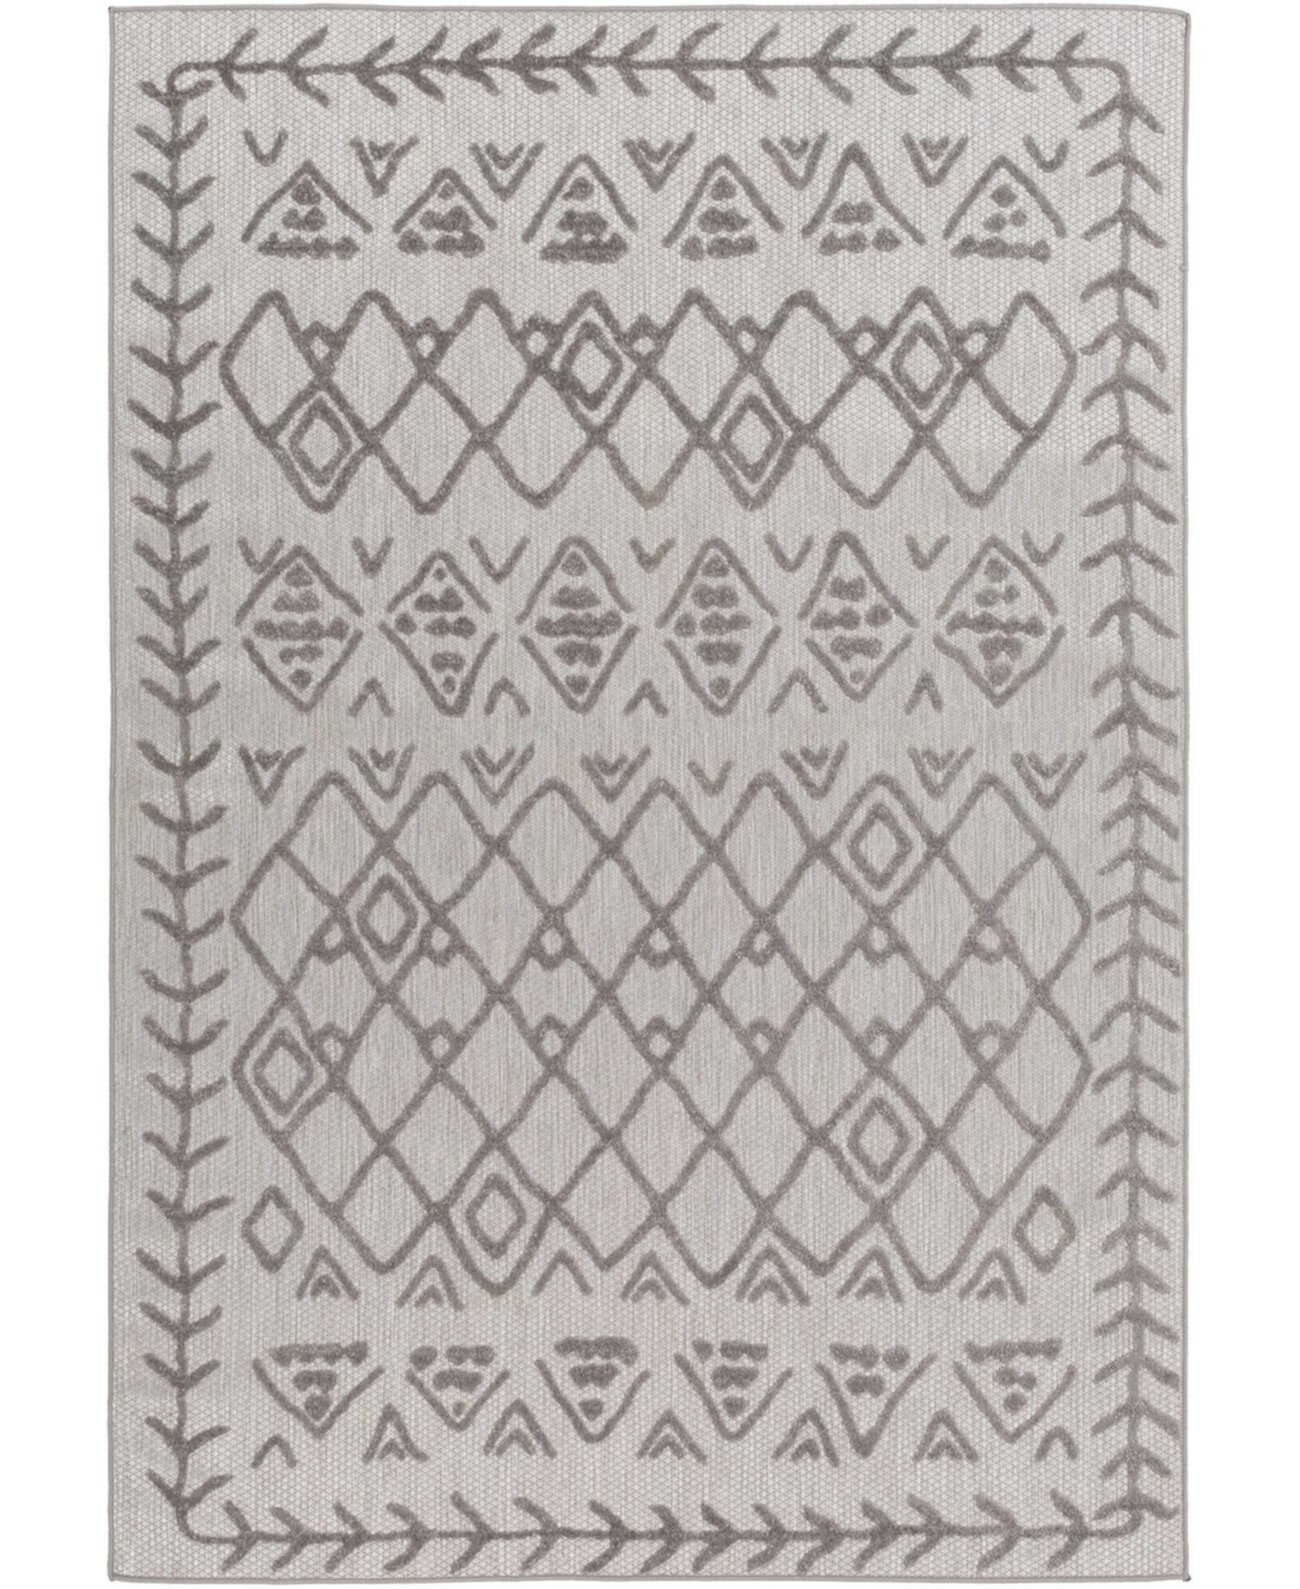 Big Sur BSR-2300 Taupe 5'3" x 7'3" Area Rug Abbie & Allie Rugs